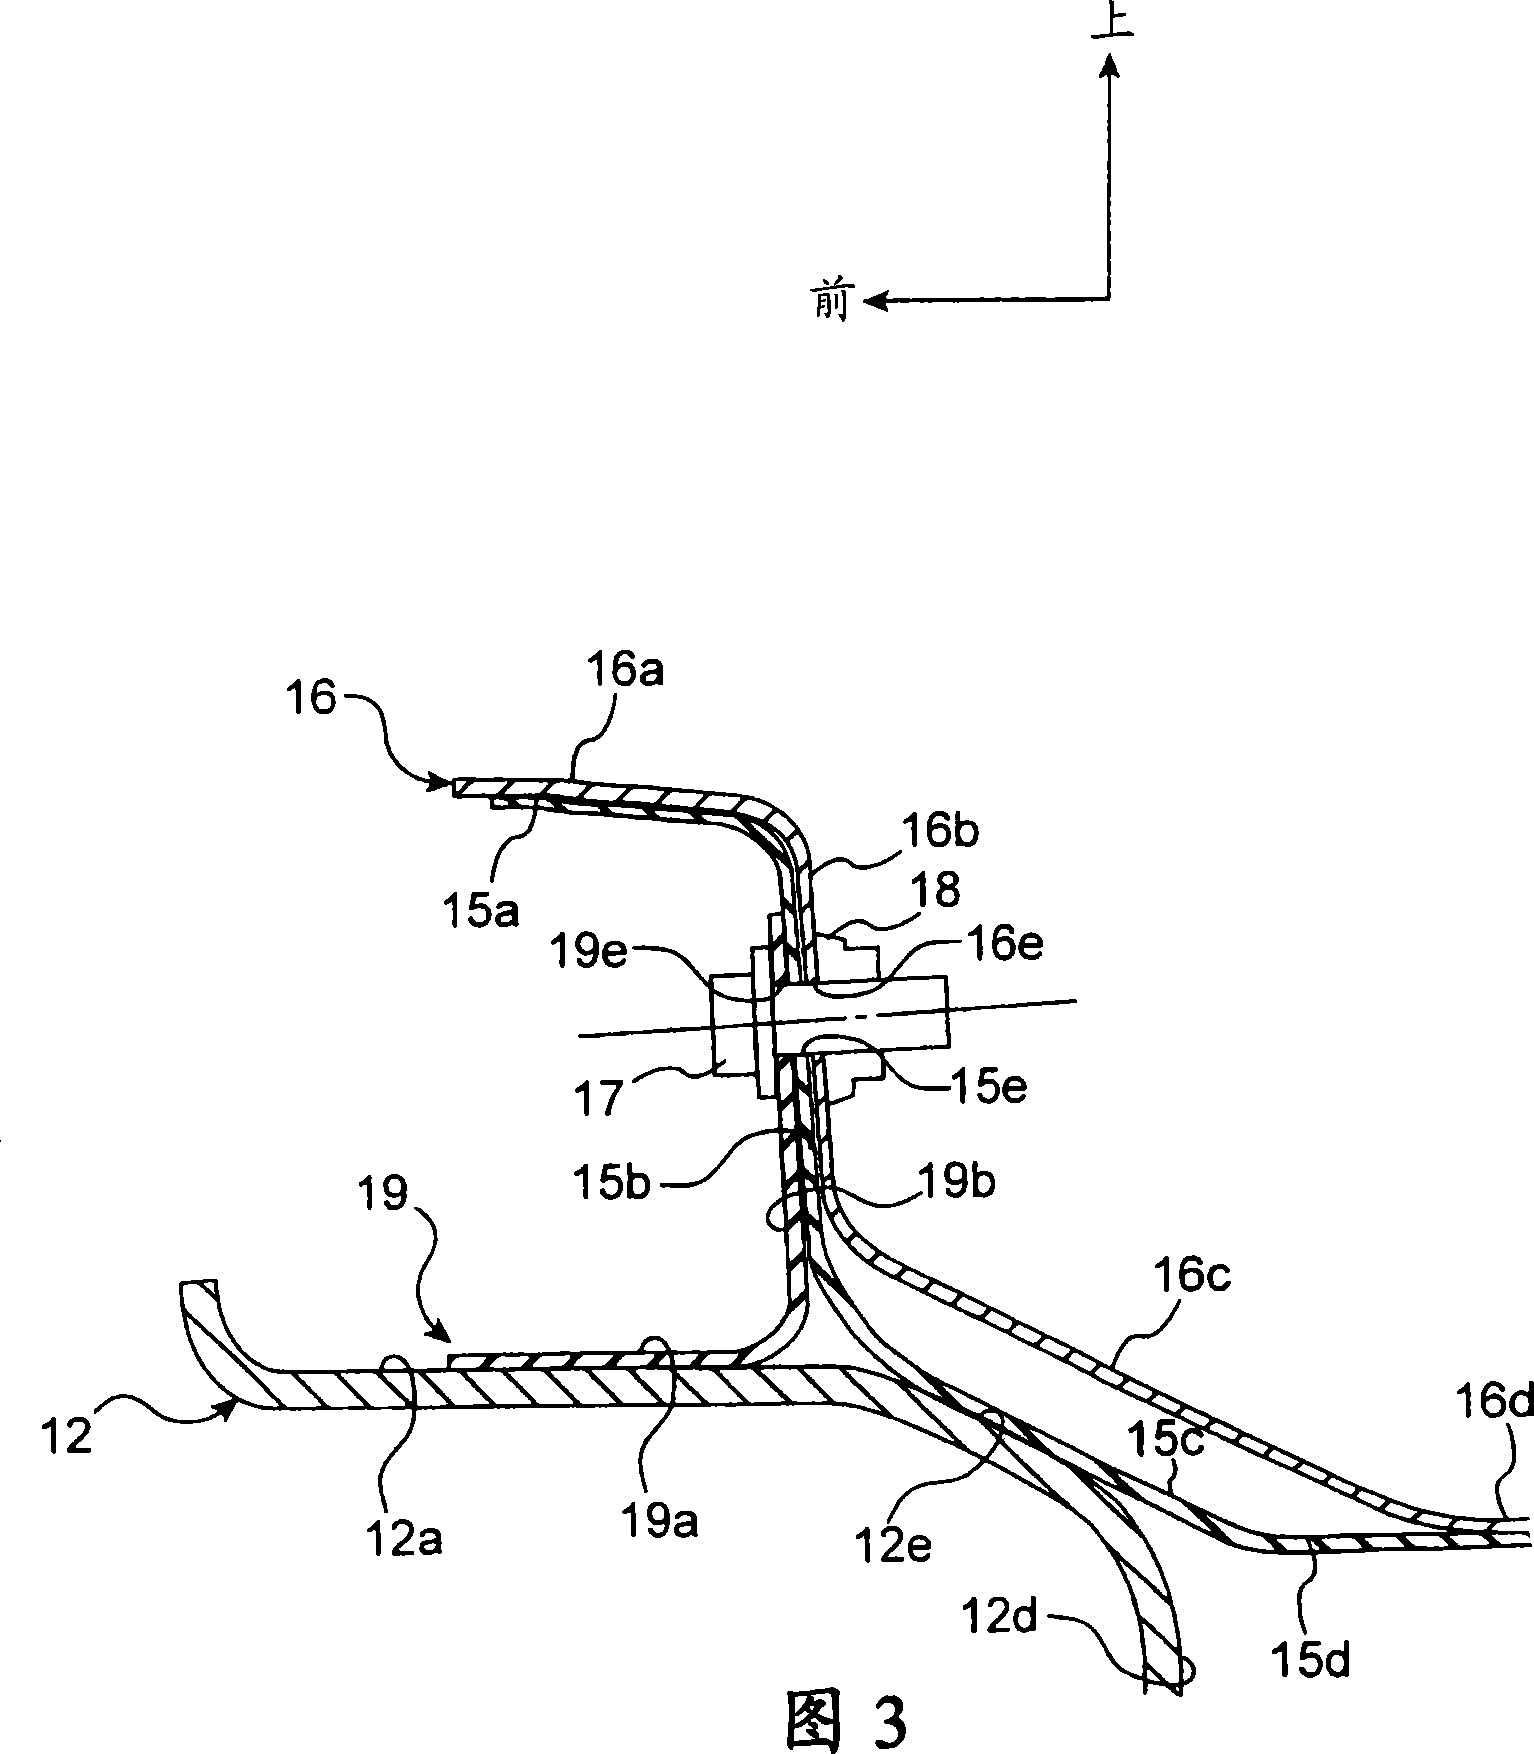 Structure for reinforcing rigidity of vehicle body